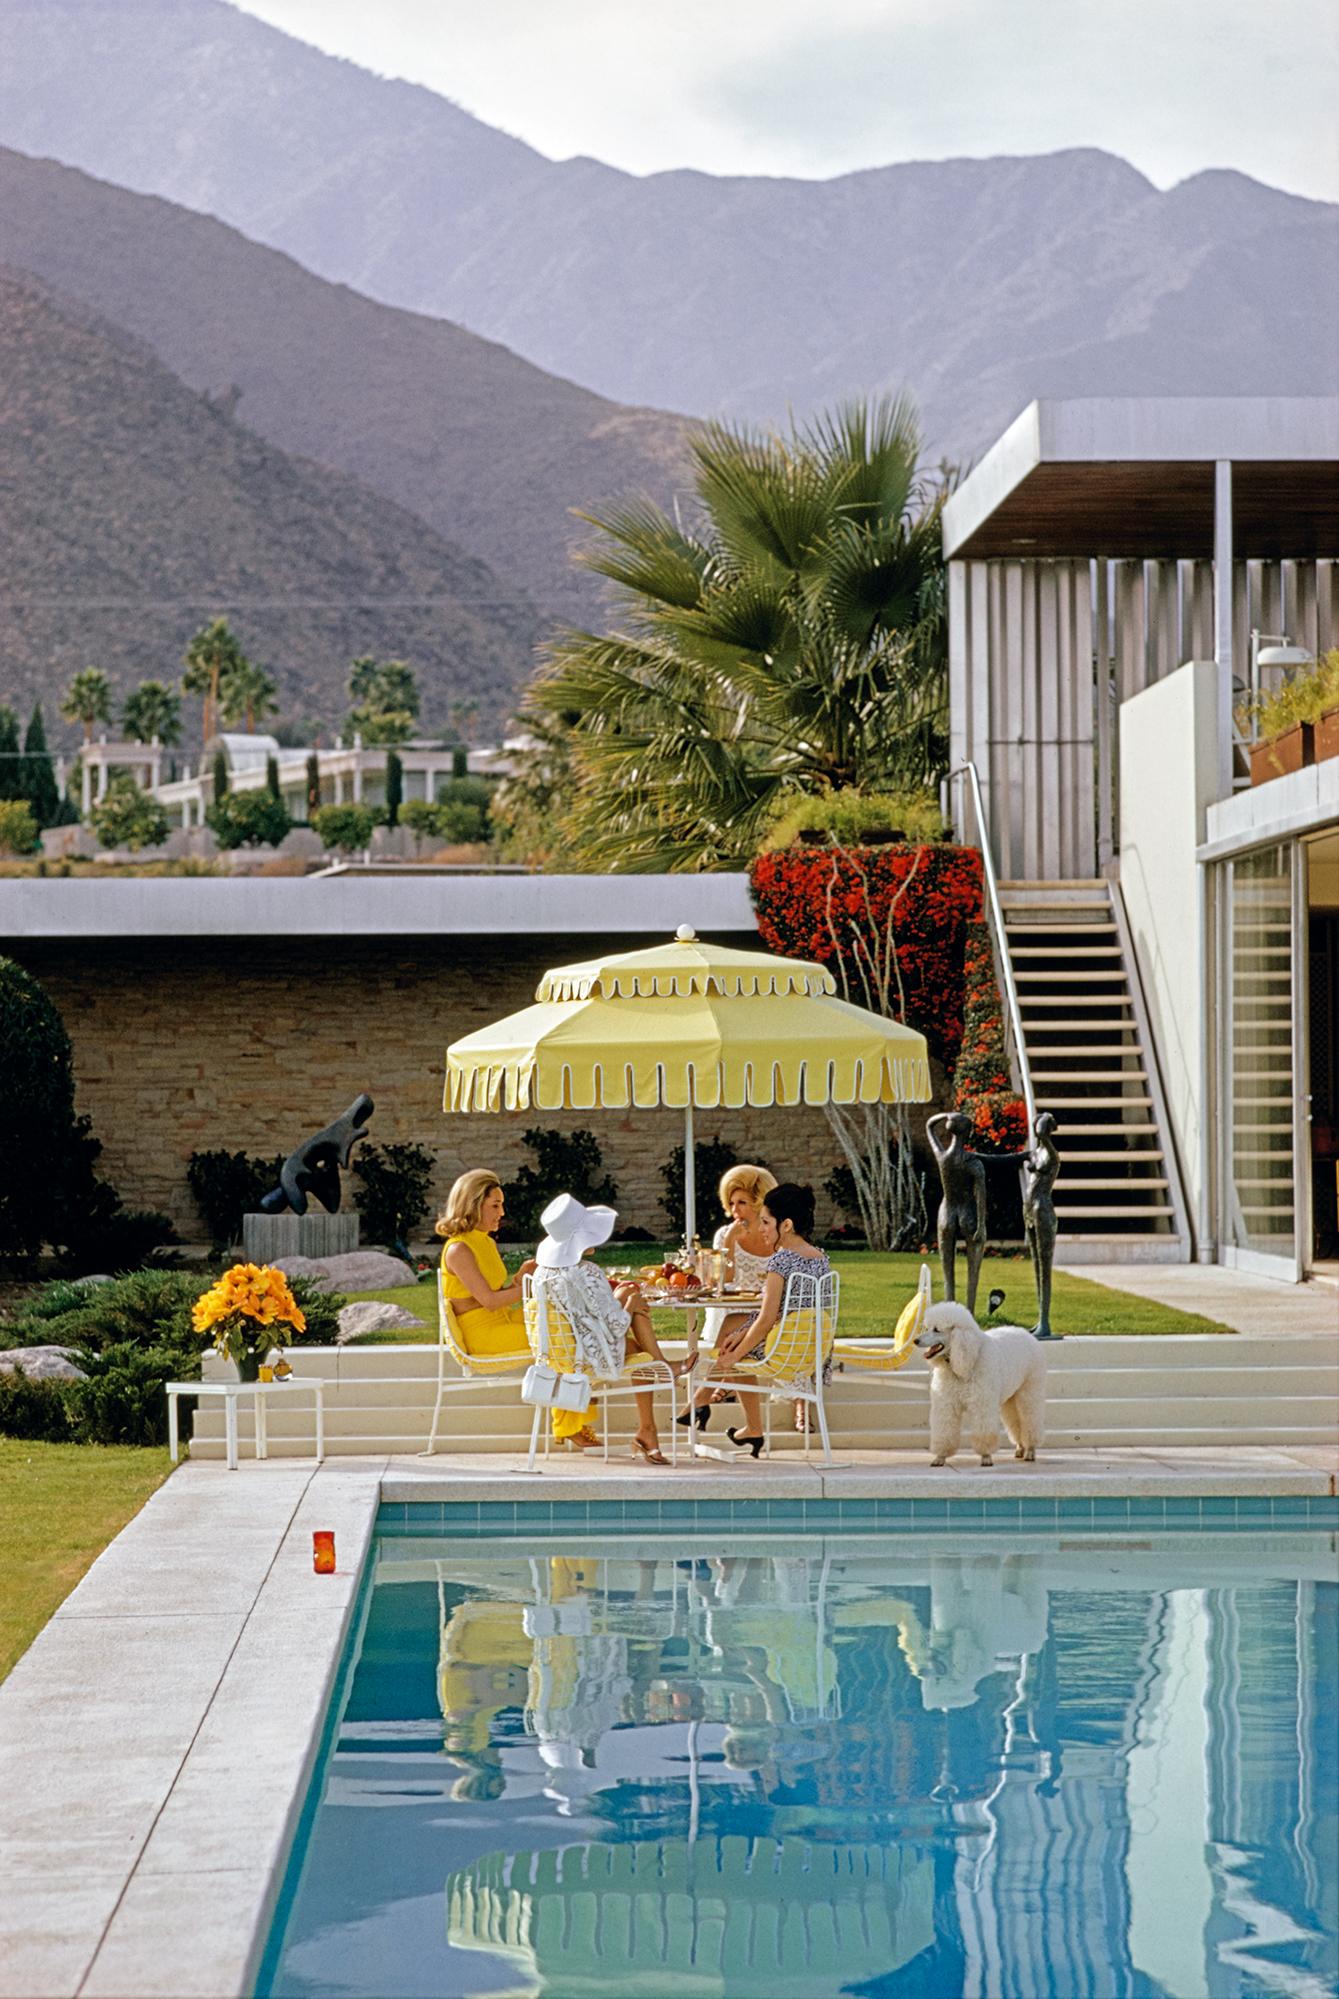 Slim Aarons
Poolside Friendship
1970 (printed later)
C print 
Estate stamped and numbered edition of 150 
with Certificate of authenticity

Nelda Linsk (left, in yellow), wife of art dealer Joseph Linsk with guests by the pool at the Linsk's desert